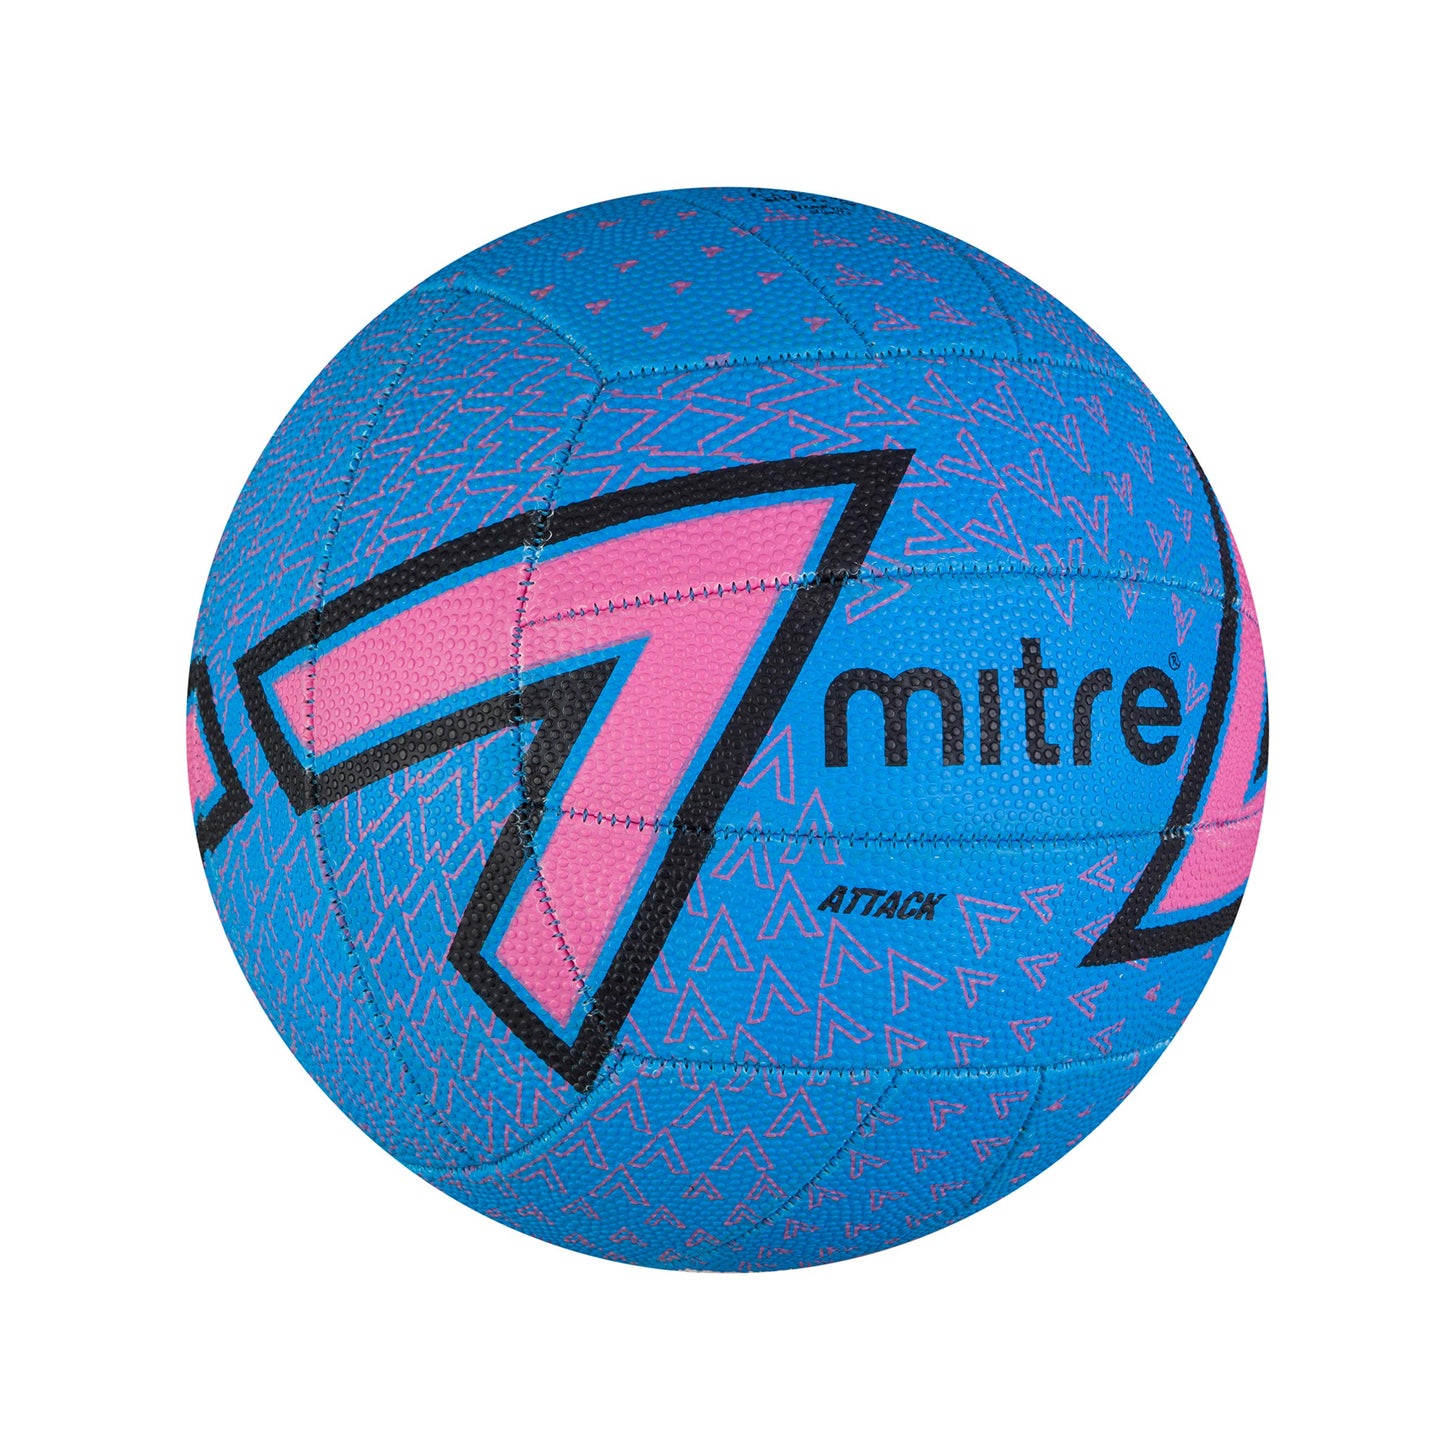 Mitre Attack Netball, Popular Style, Interactive Design, Soft-Touch, Blue, Pink, Black, Ball